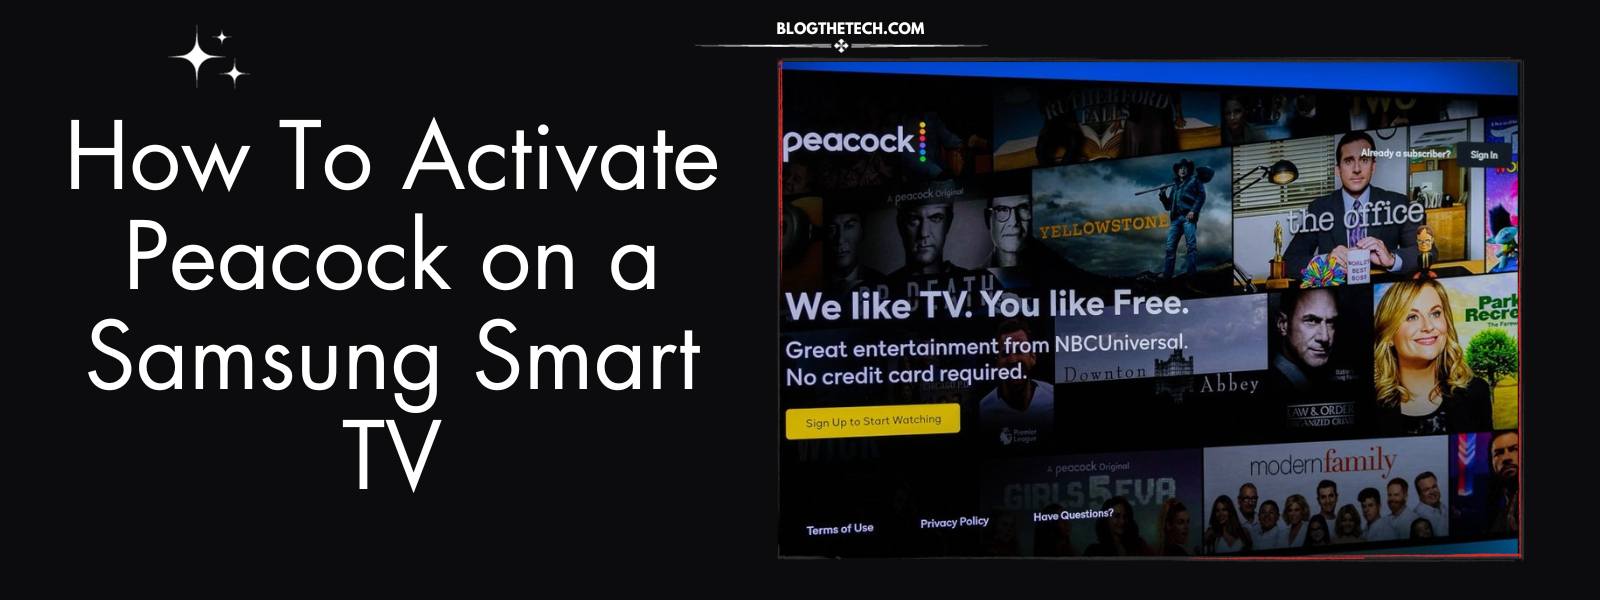 activate-peacock-on-samsung-smart-tv-featured